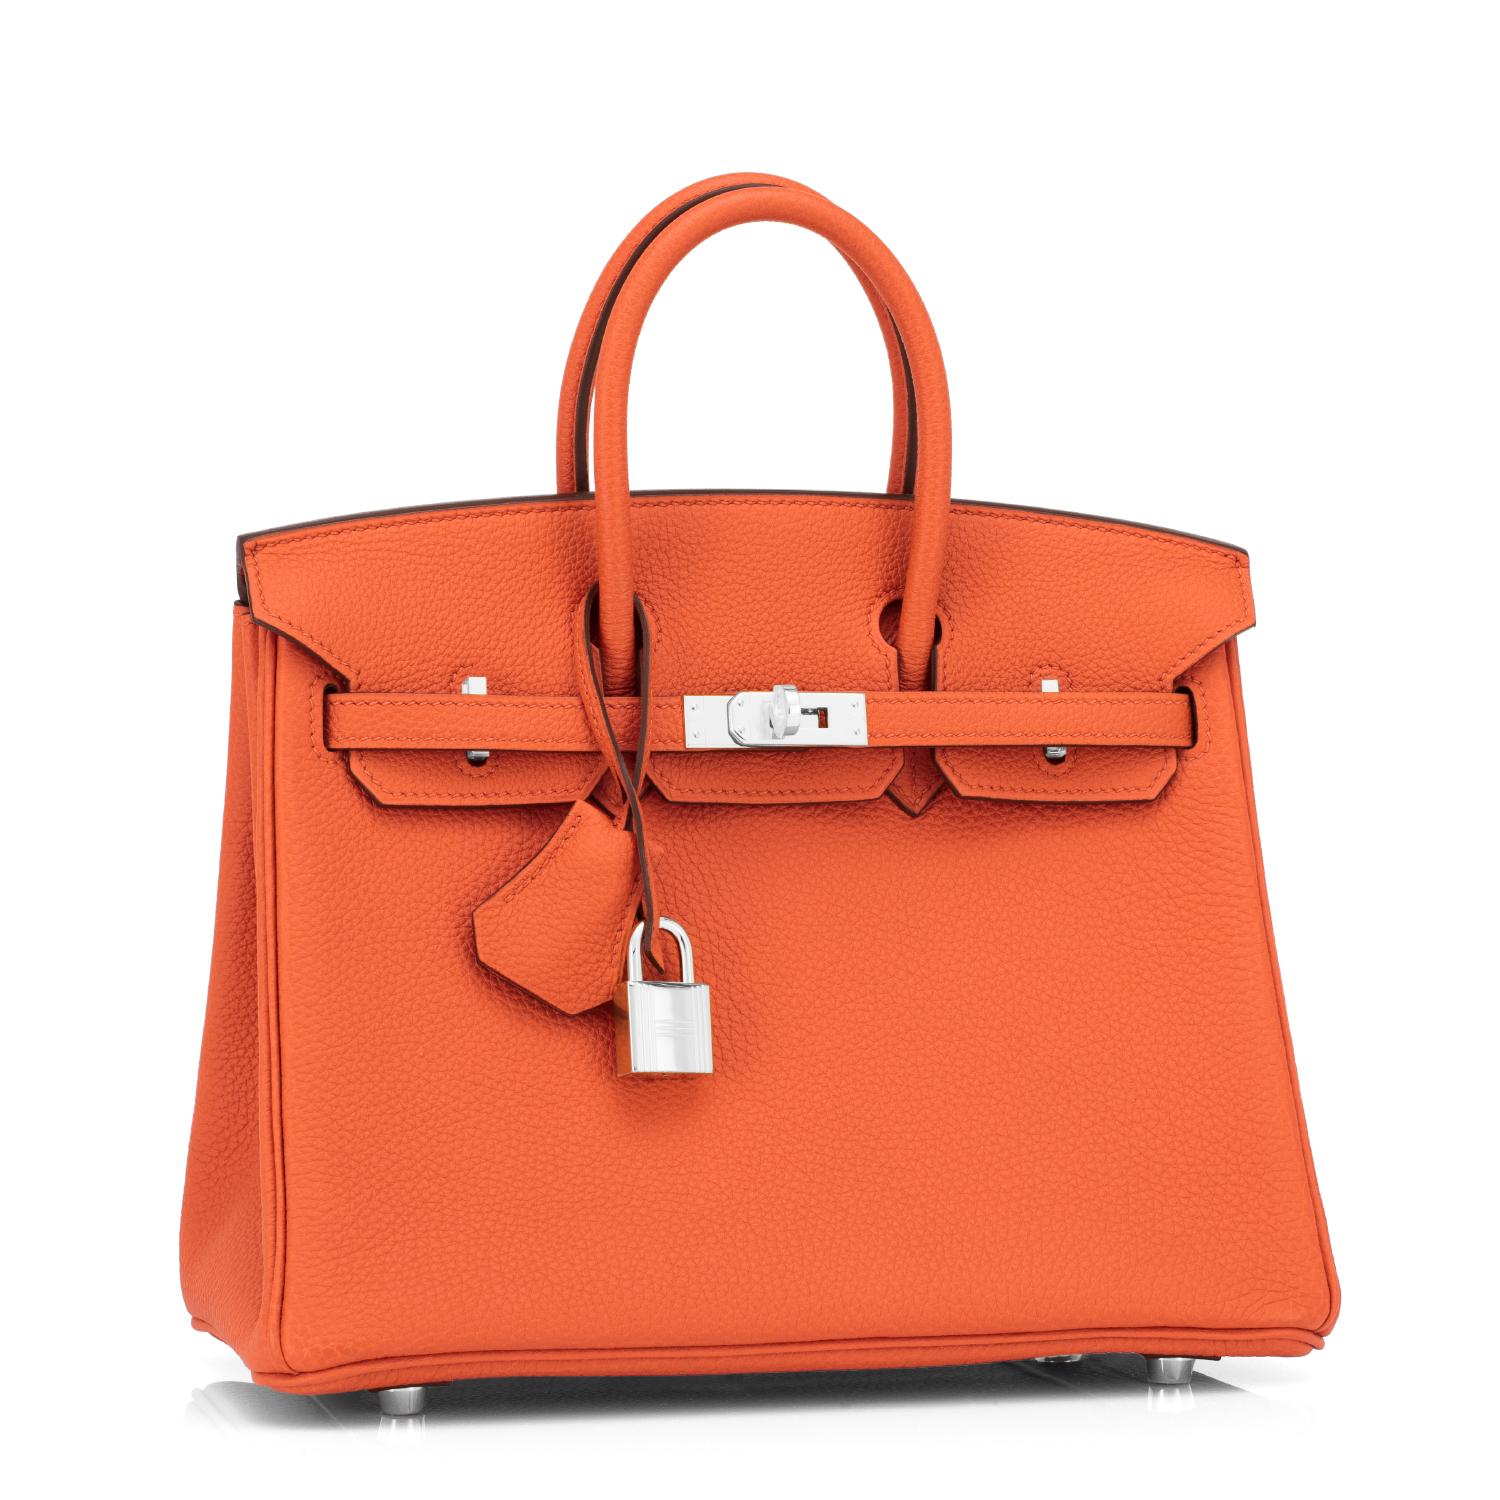 Hermes Birkin 25 Classic Hermes Orange Palladium Hardware Bag RARE U Stamp, 2022
Ultra rare! From an extremely limited Hermes production run from year end 2022.
Just purchased from Hermes store; bag bears new interior 2022 U Stamp.
Brand New in Box.